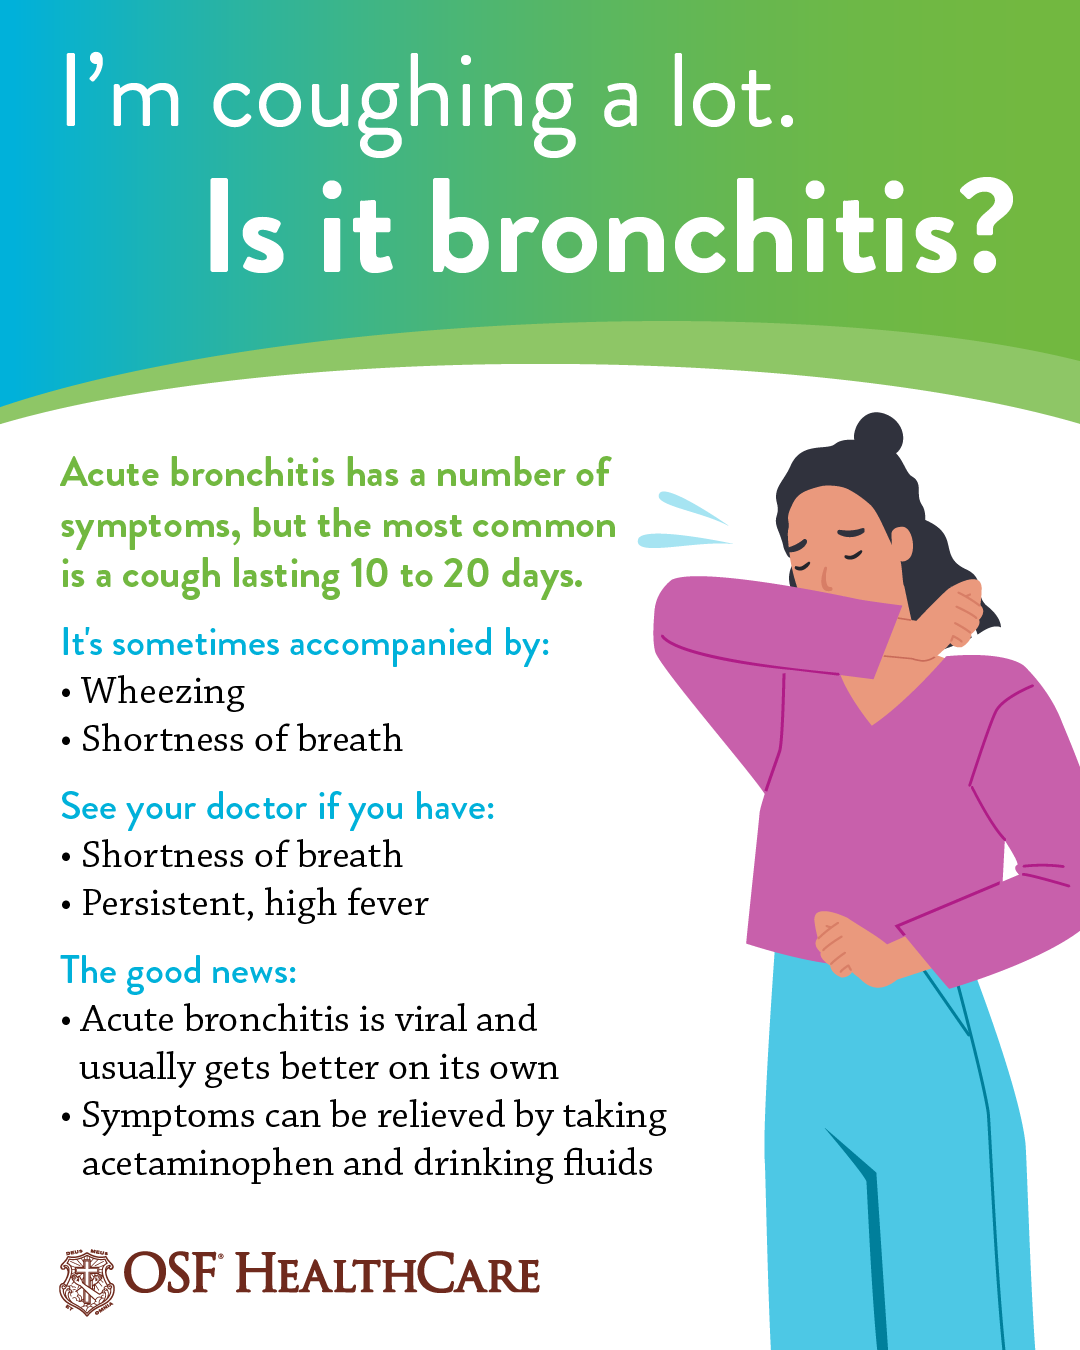 I’m coughing a lot. Is it bronchitis?  OSF HealthCare